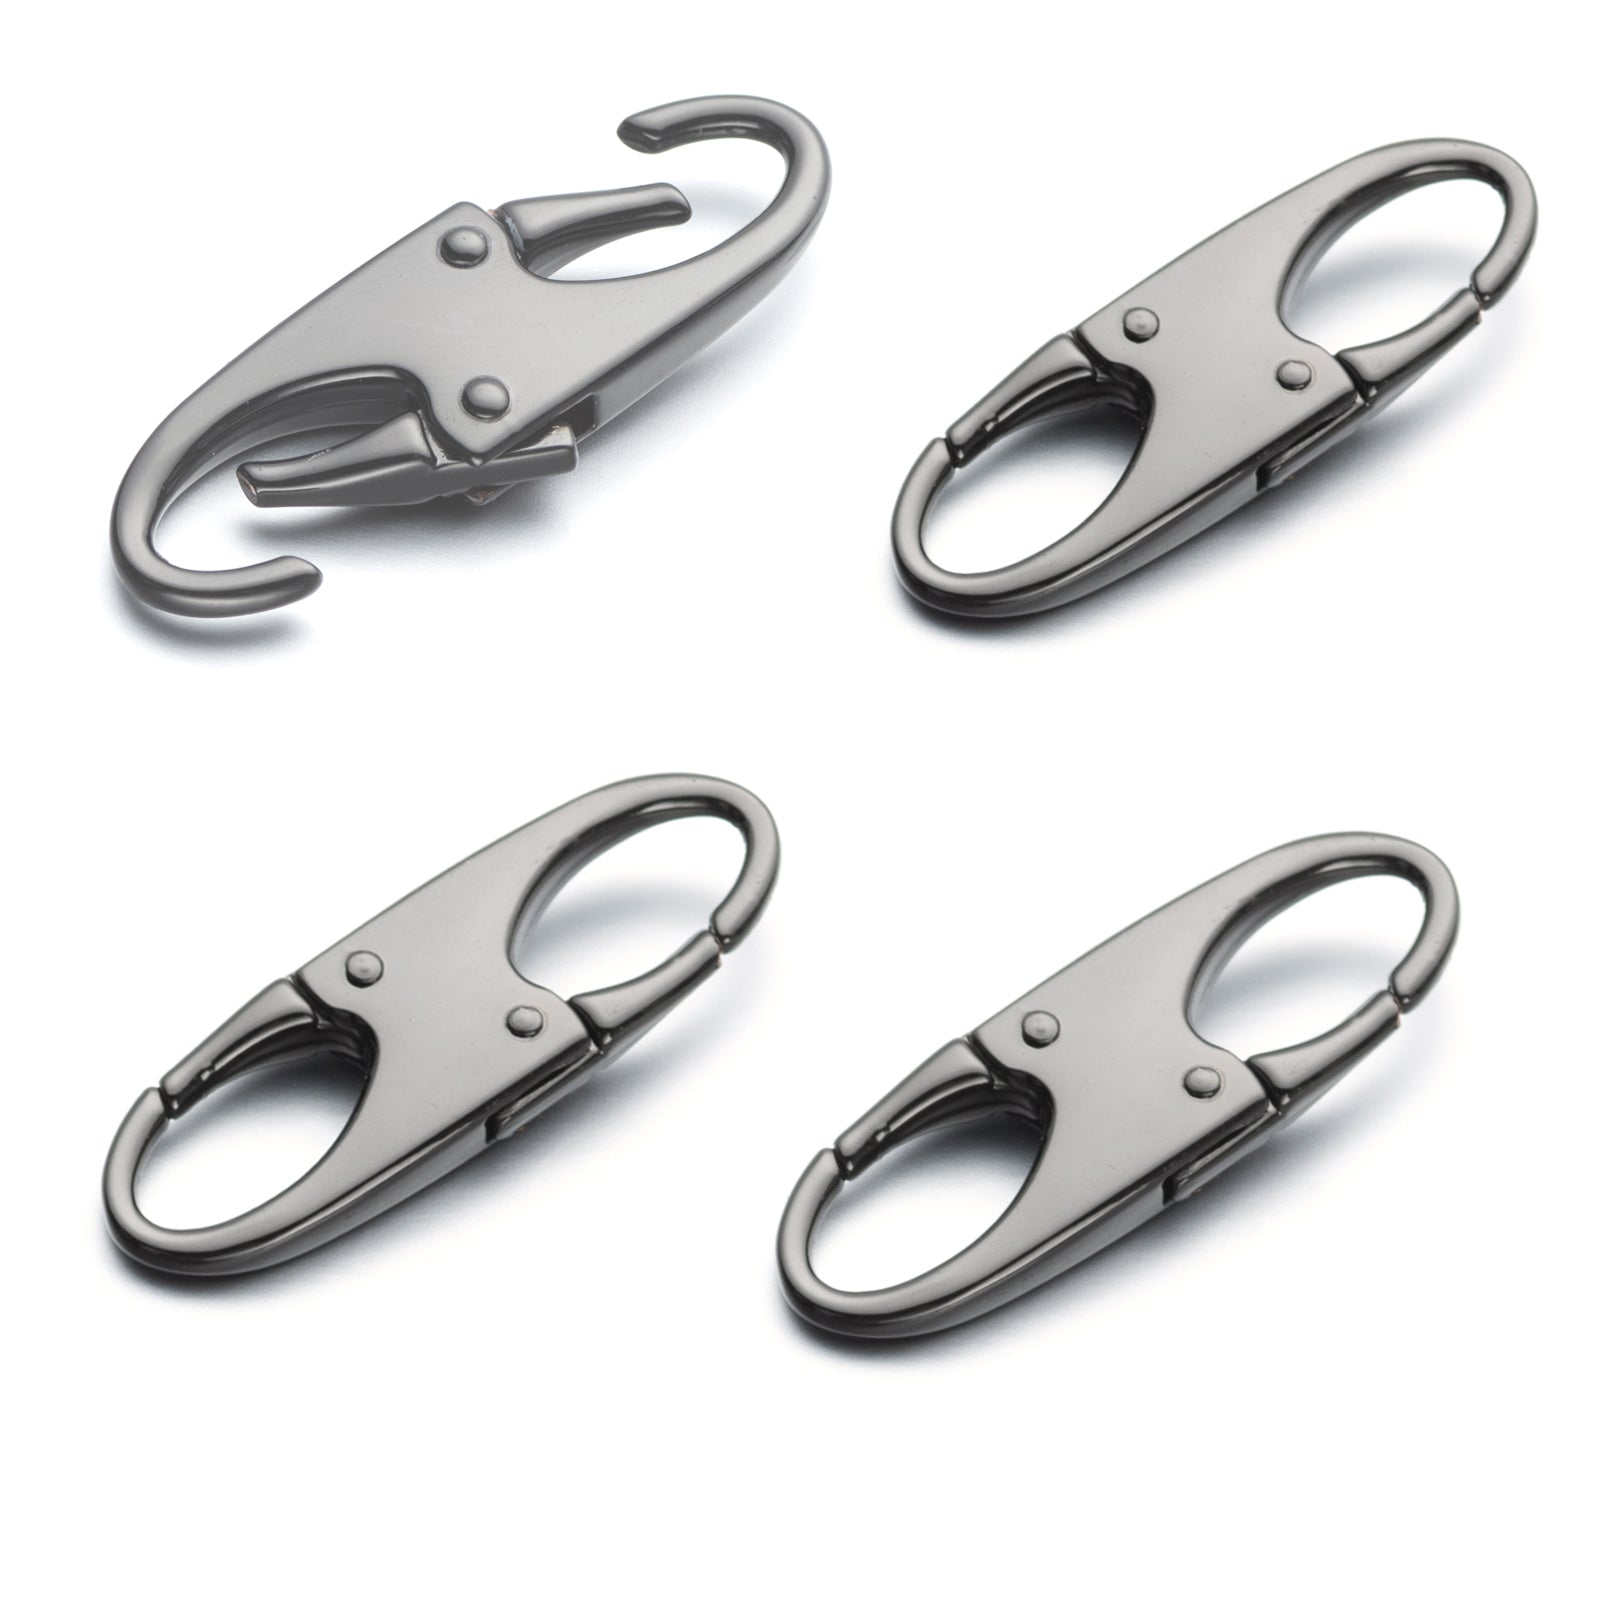 Double Small Carabiner Clips - Zipper Clip Theft Detterent Holding The –  zpsolution